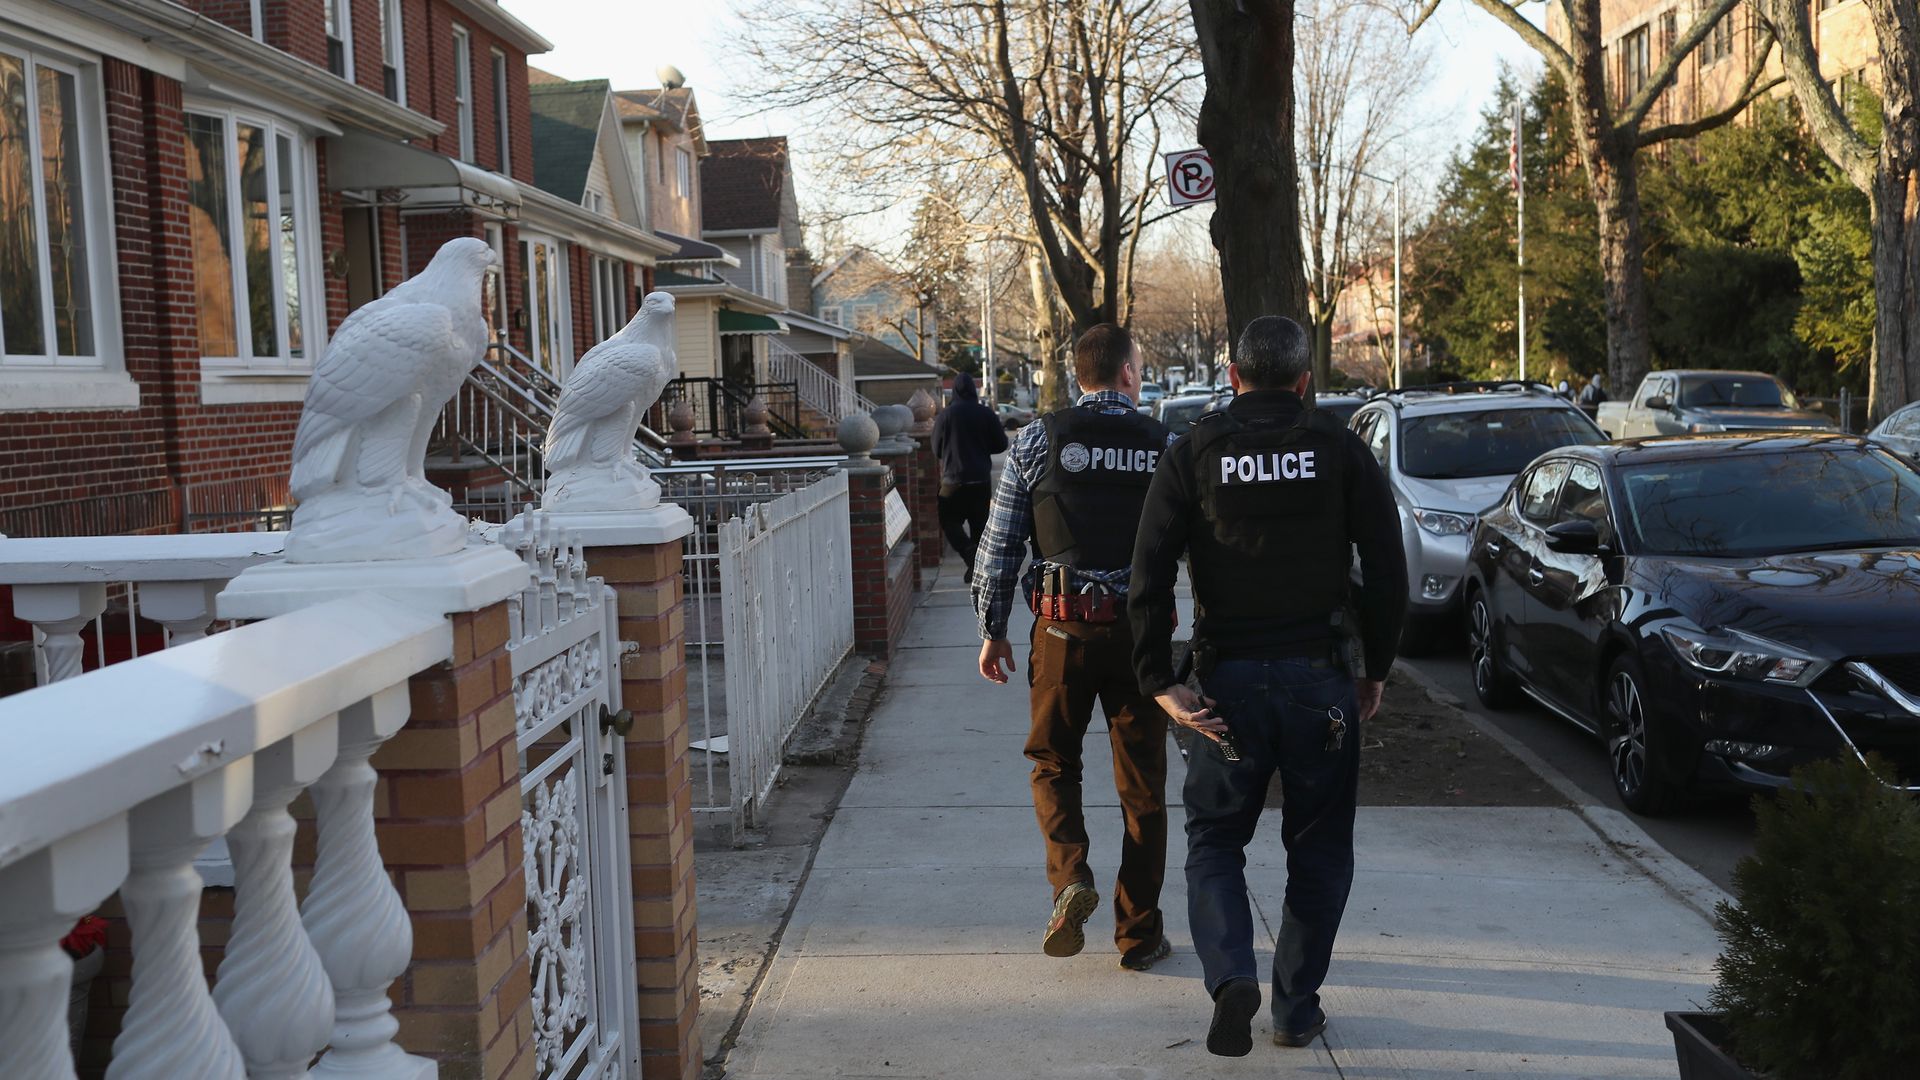 Two police officers walk through a neighborhood